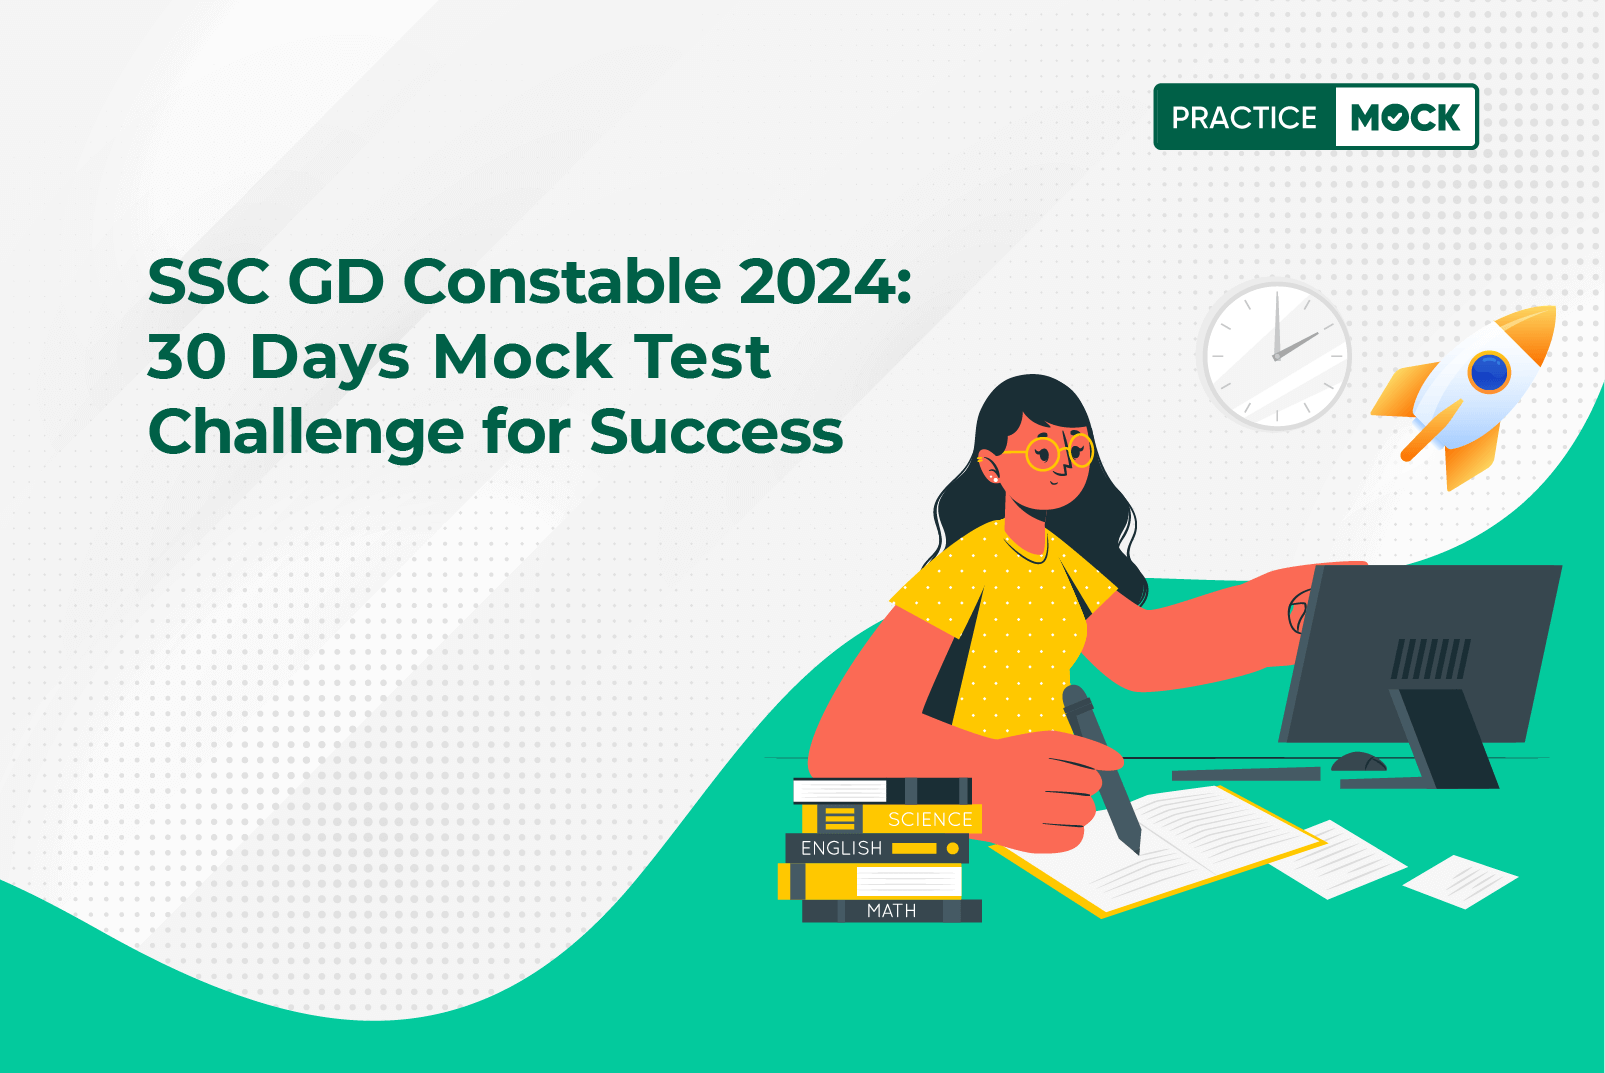 SSC GD Constable 2024: 30 Days Mock Test Challenge for Success